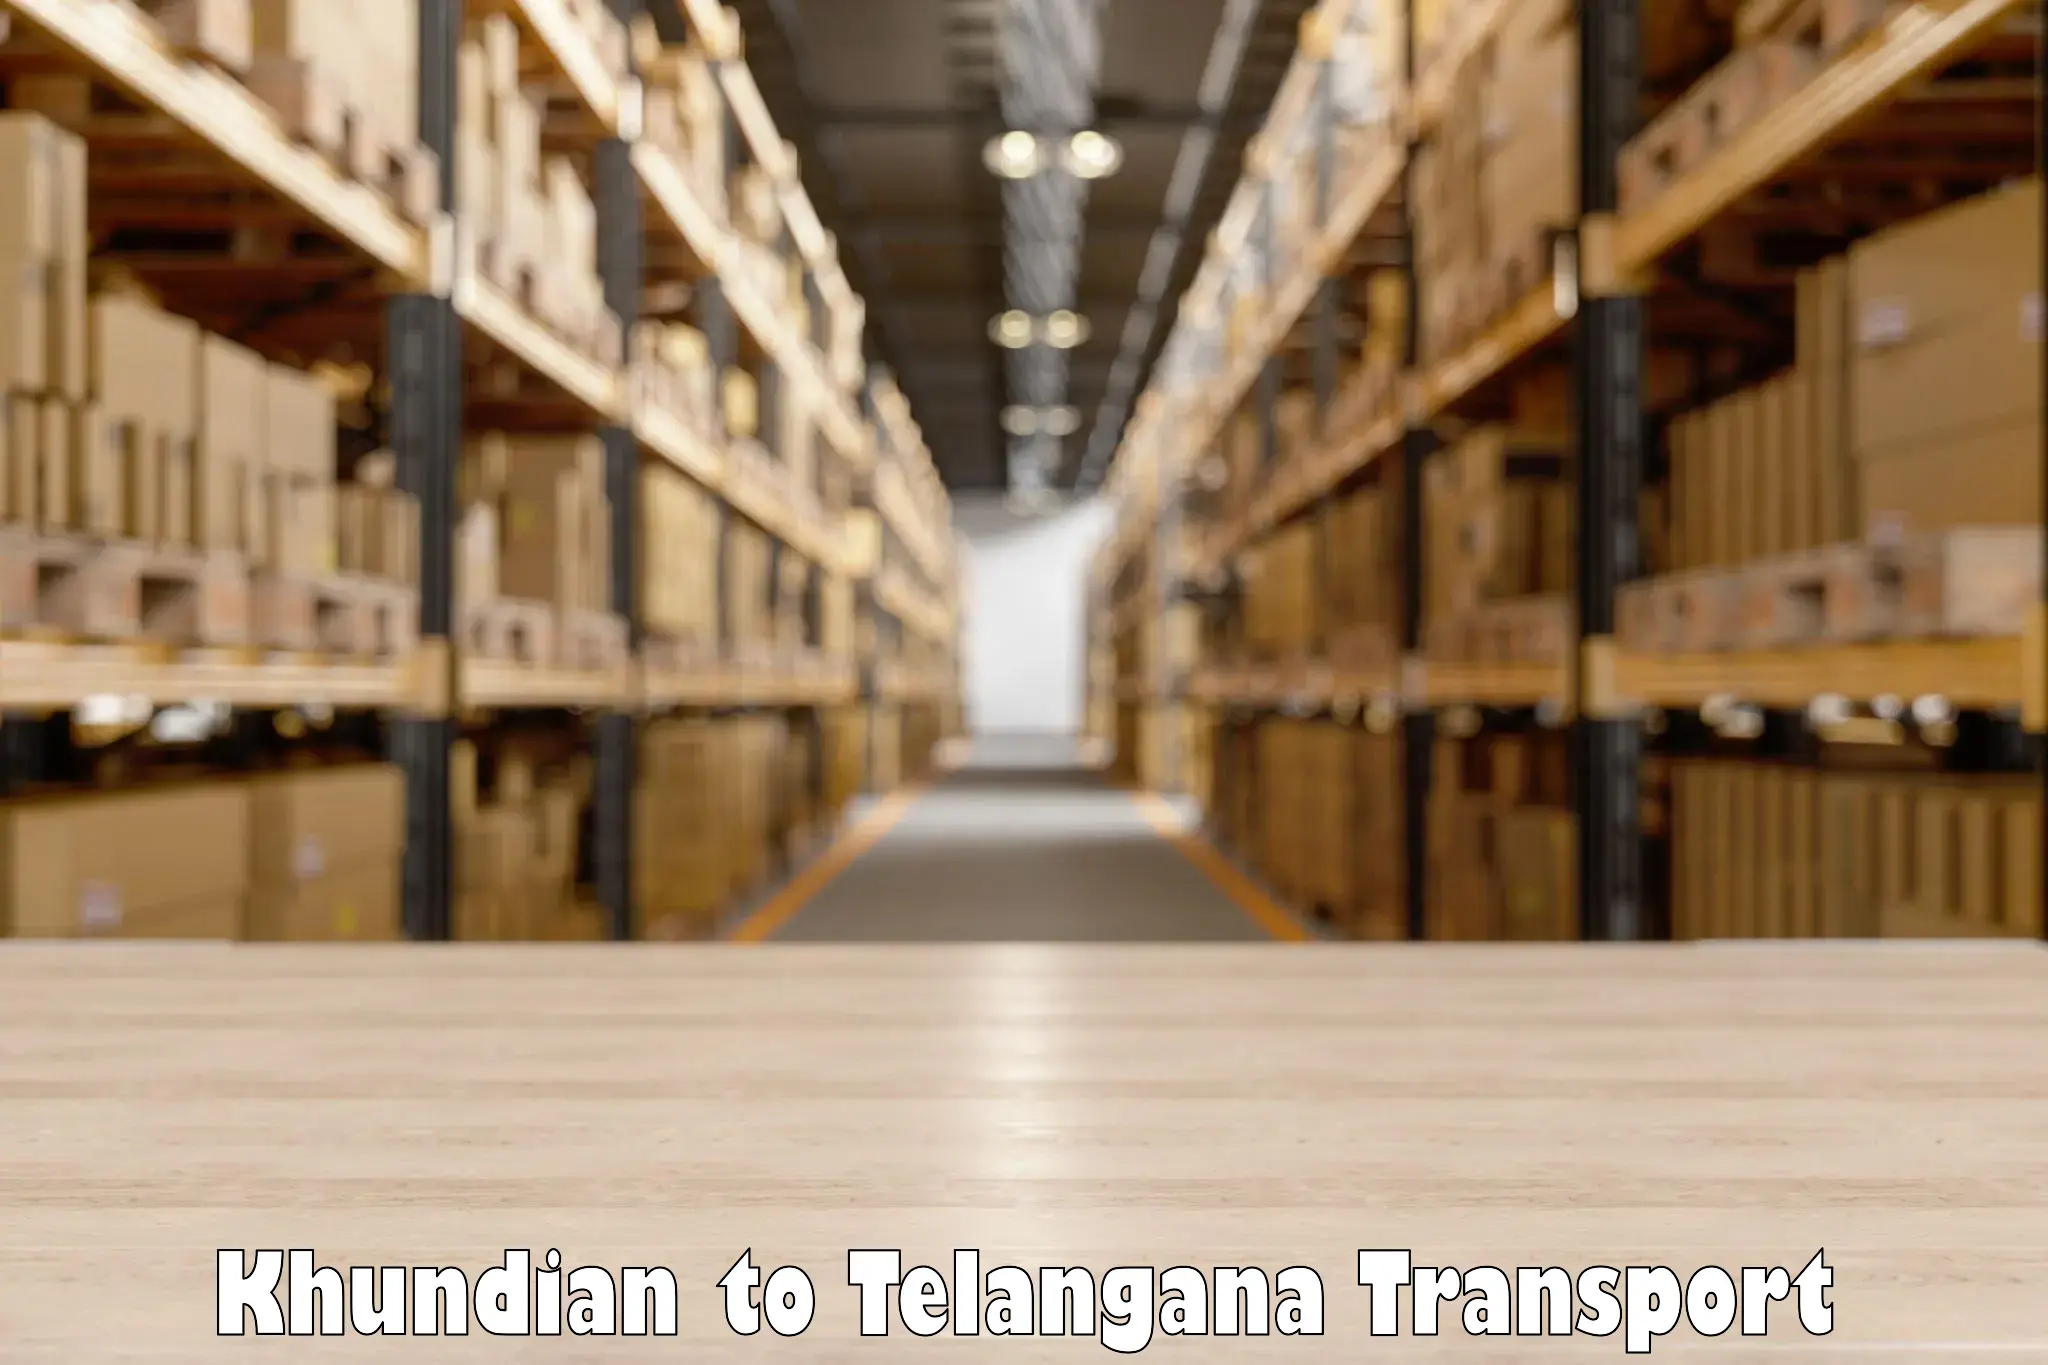 Goods delivery service Khundian to Hyderabad